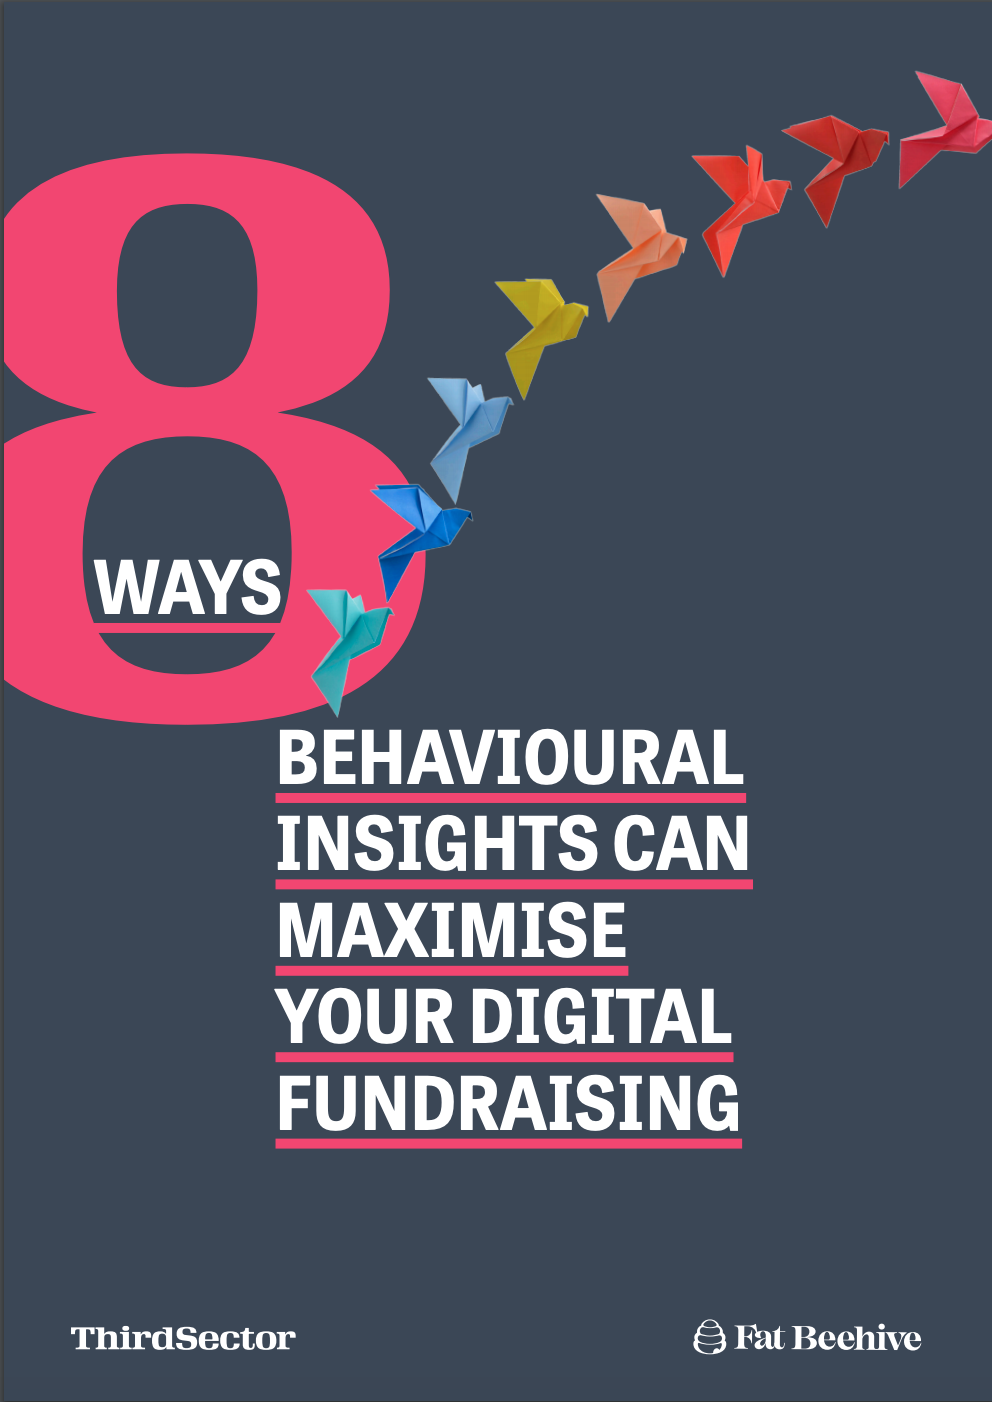 The cover of the '8 ways behavioural science can maximise your digital fundraising' report